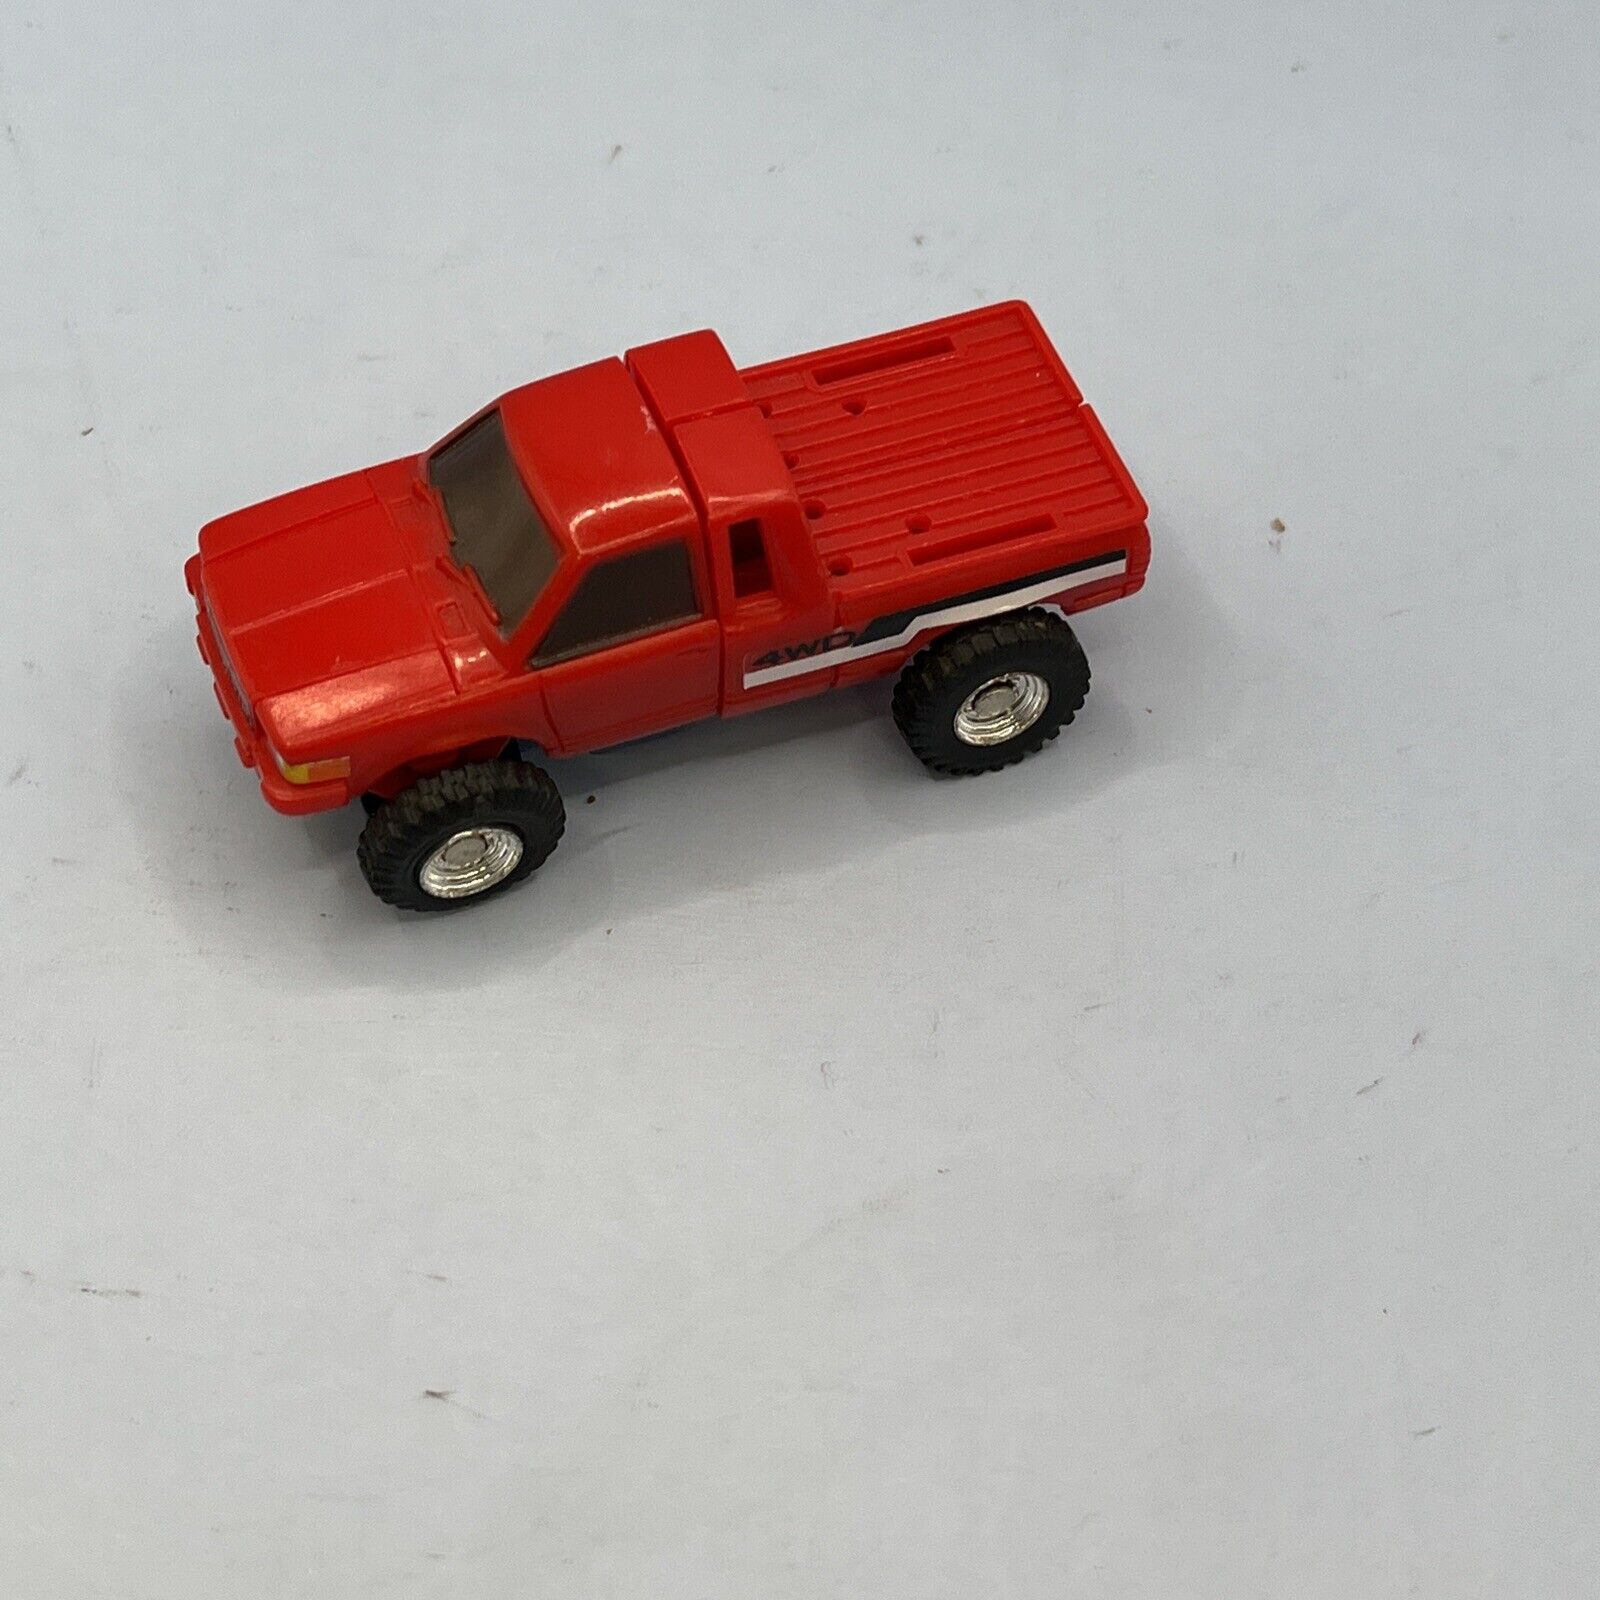 1984 Vintage MR-35 Small Foot 4X4 Pick Up Truck (Missing pieces)